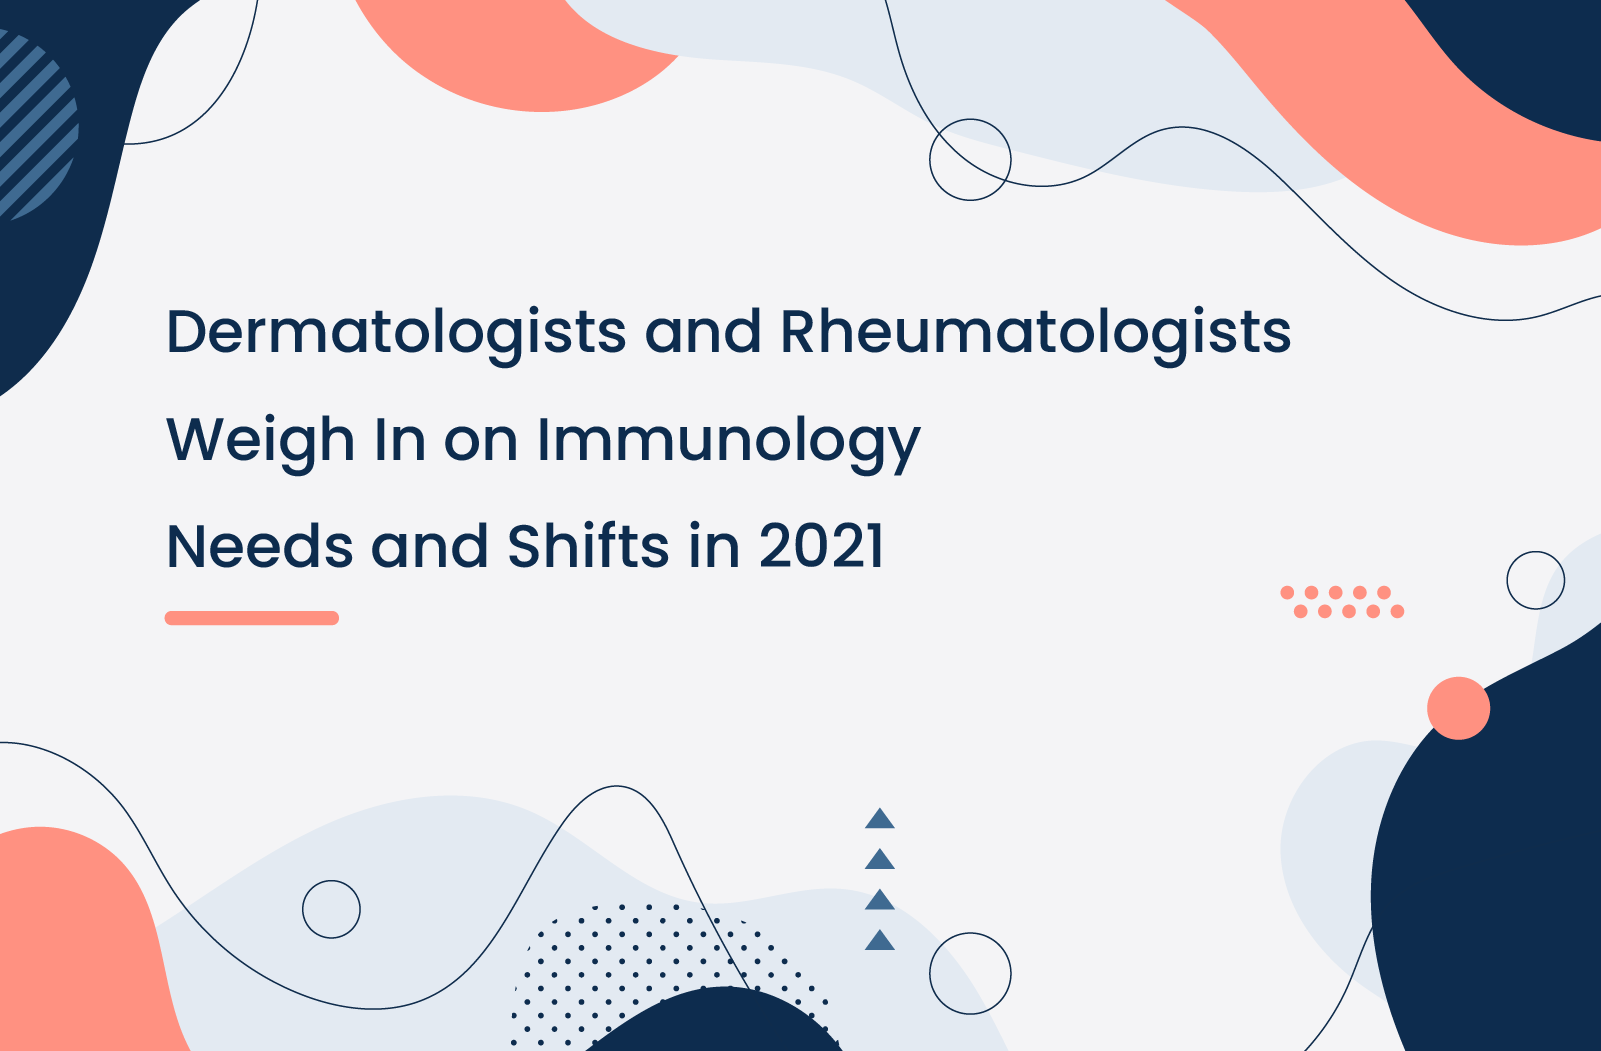 Dermatologists and Rheumatologists Weigh In on Immunology Needs and Shifts in 2021